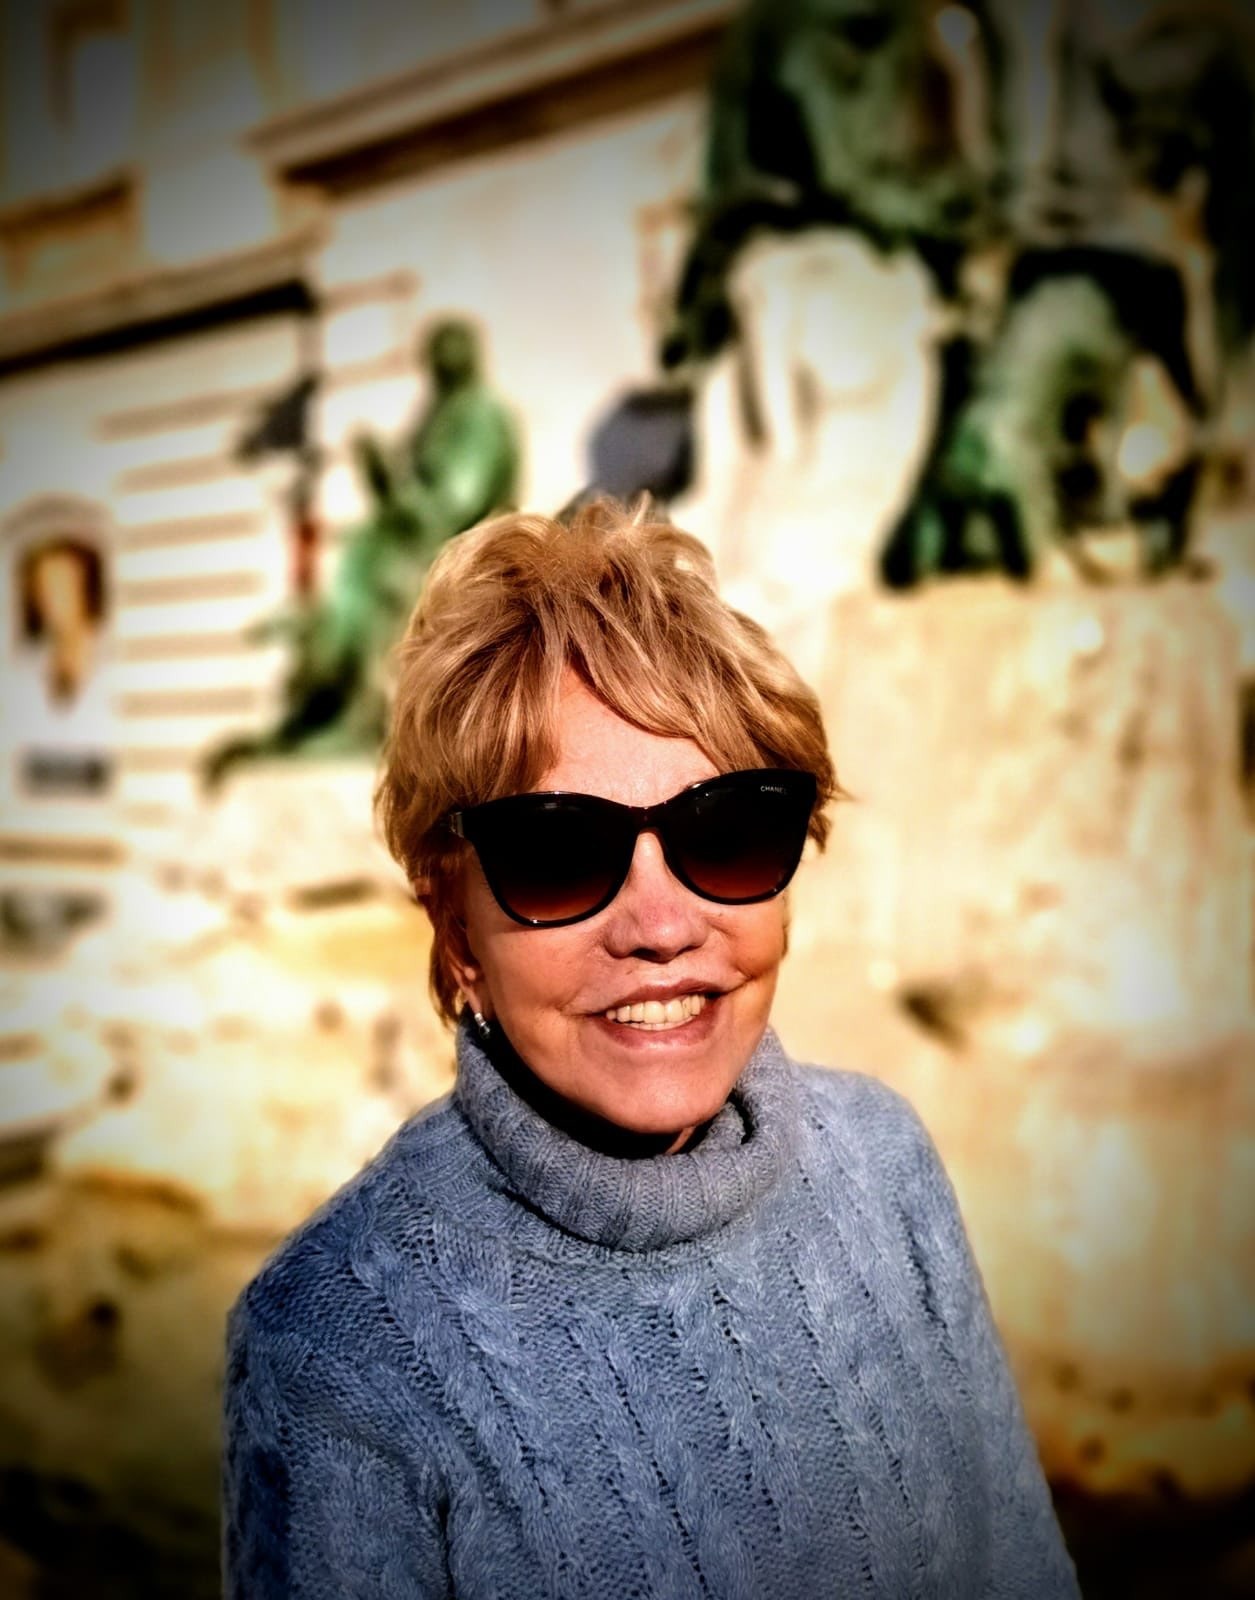 A photograph of Eliana, a woman standing in the sun whilst wearing sun glasses and smiling.